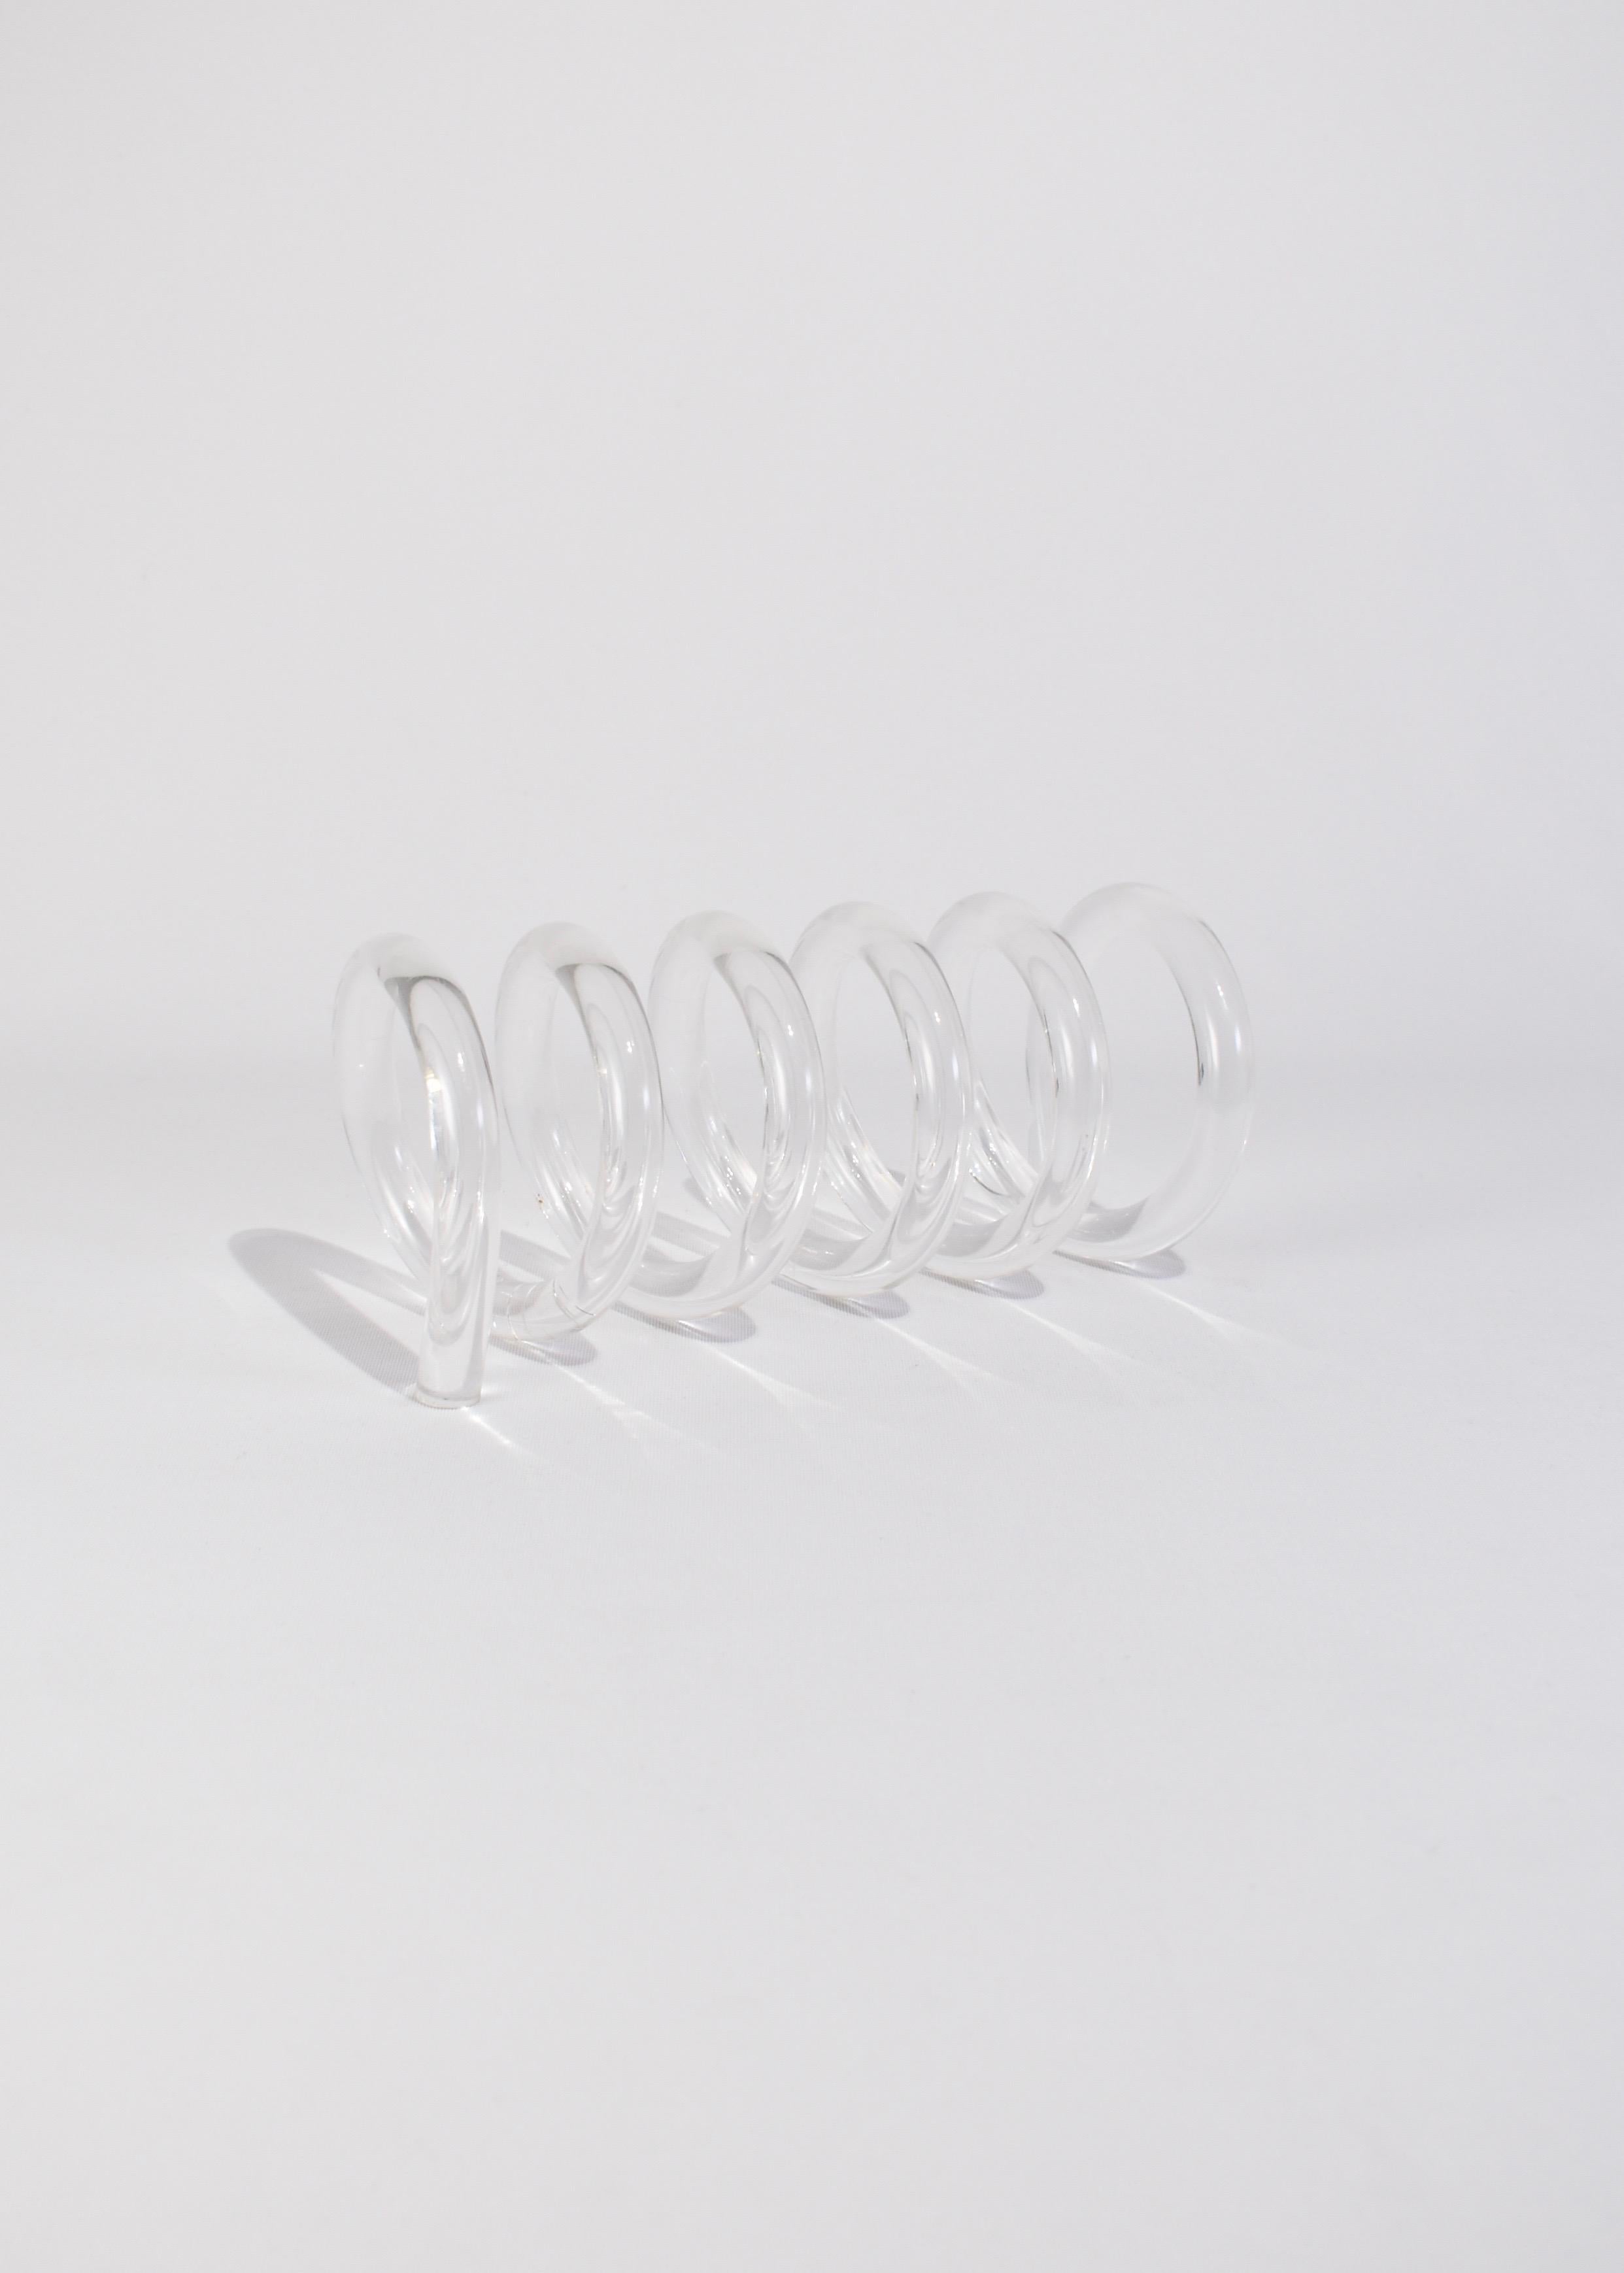 Beautiful vintage lucite spiral sculpture by Dorothy Thorpe. May be displayed standing as a sculptural piece or lying as an organizer for letters.